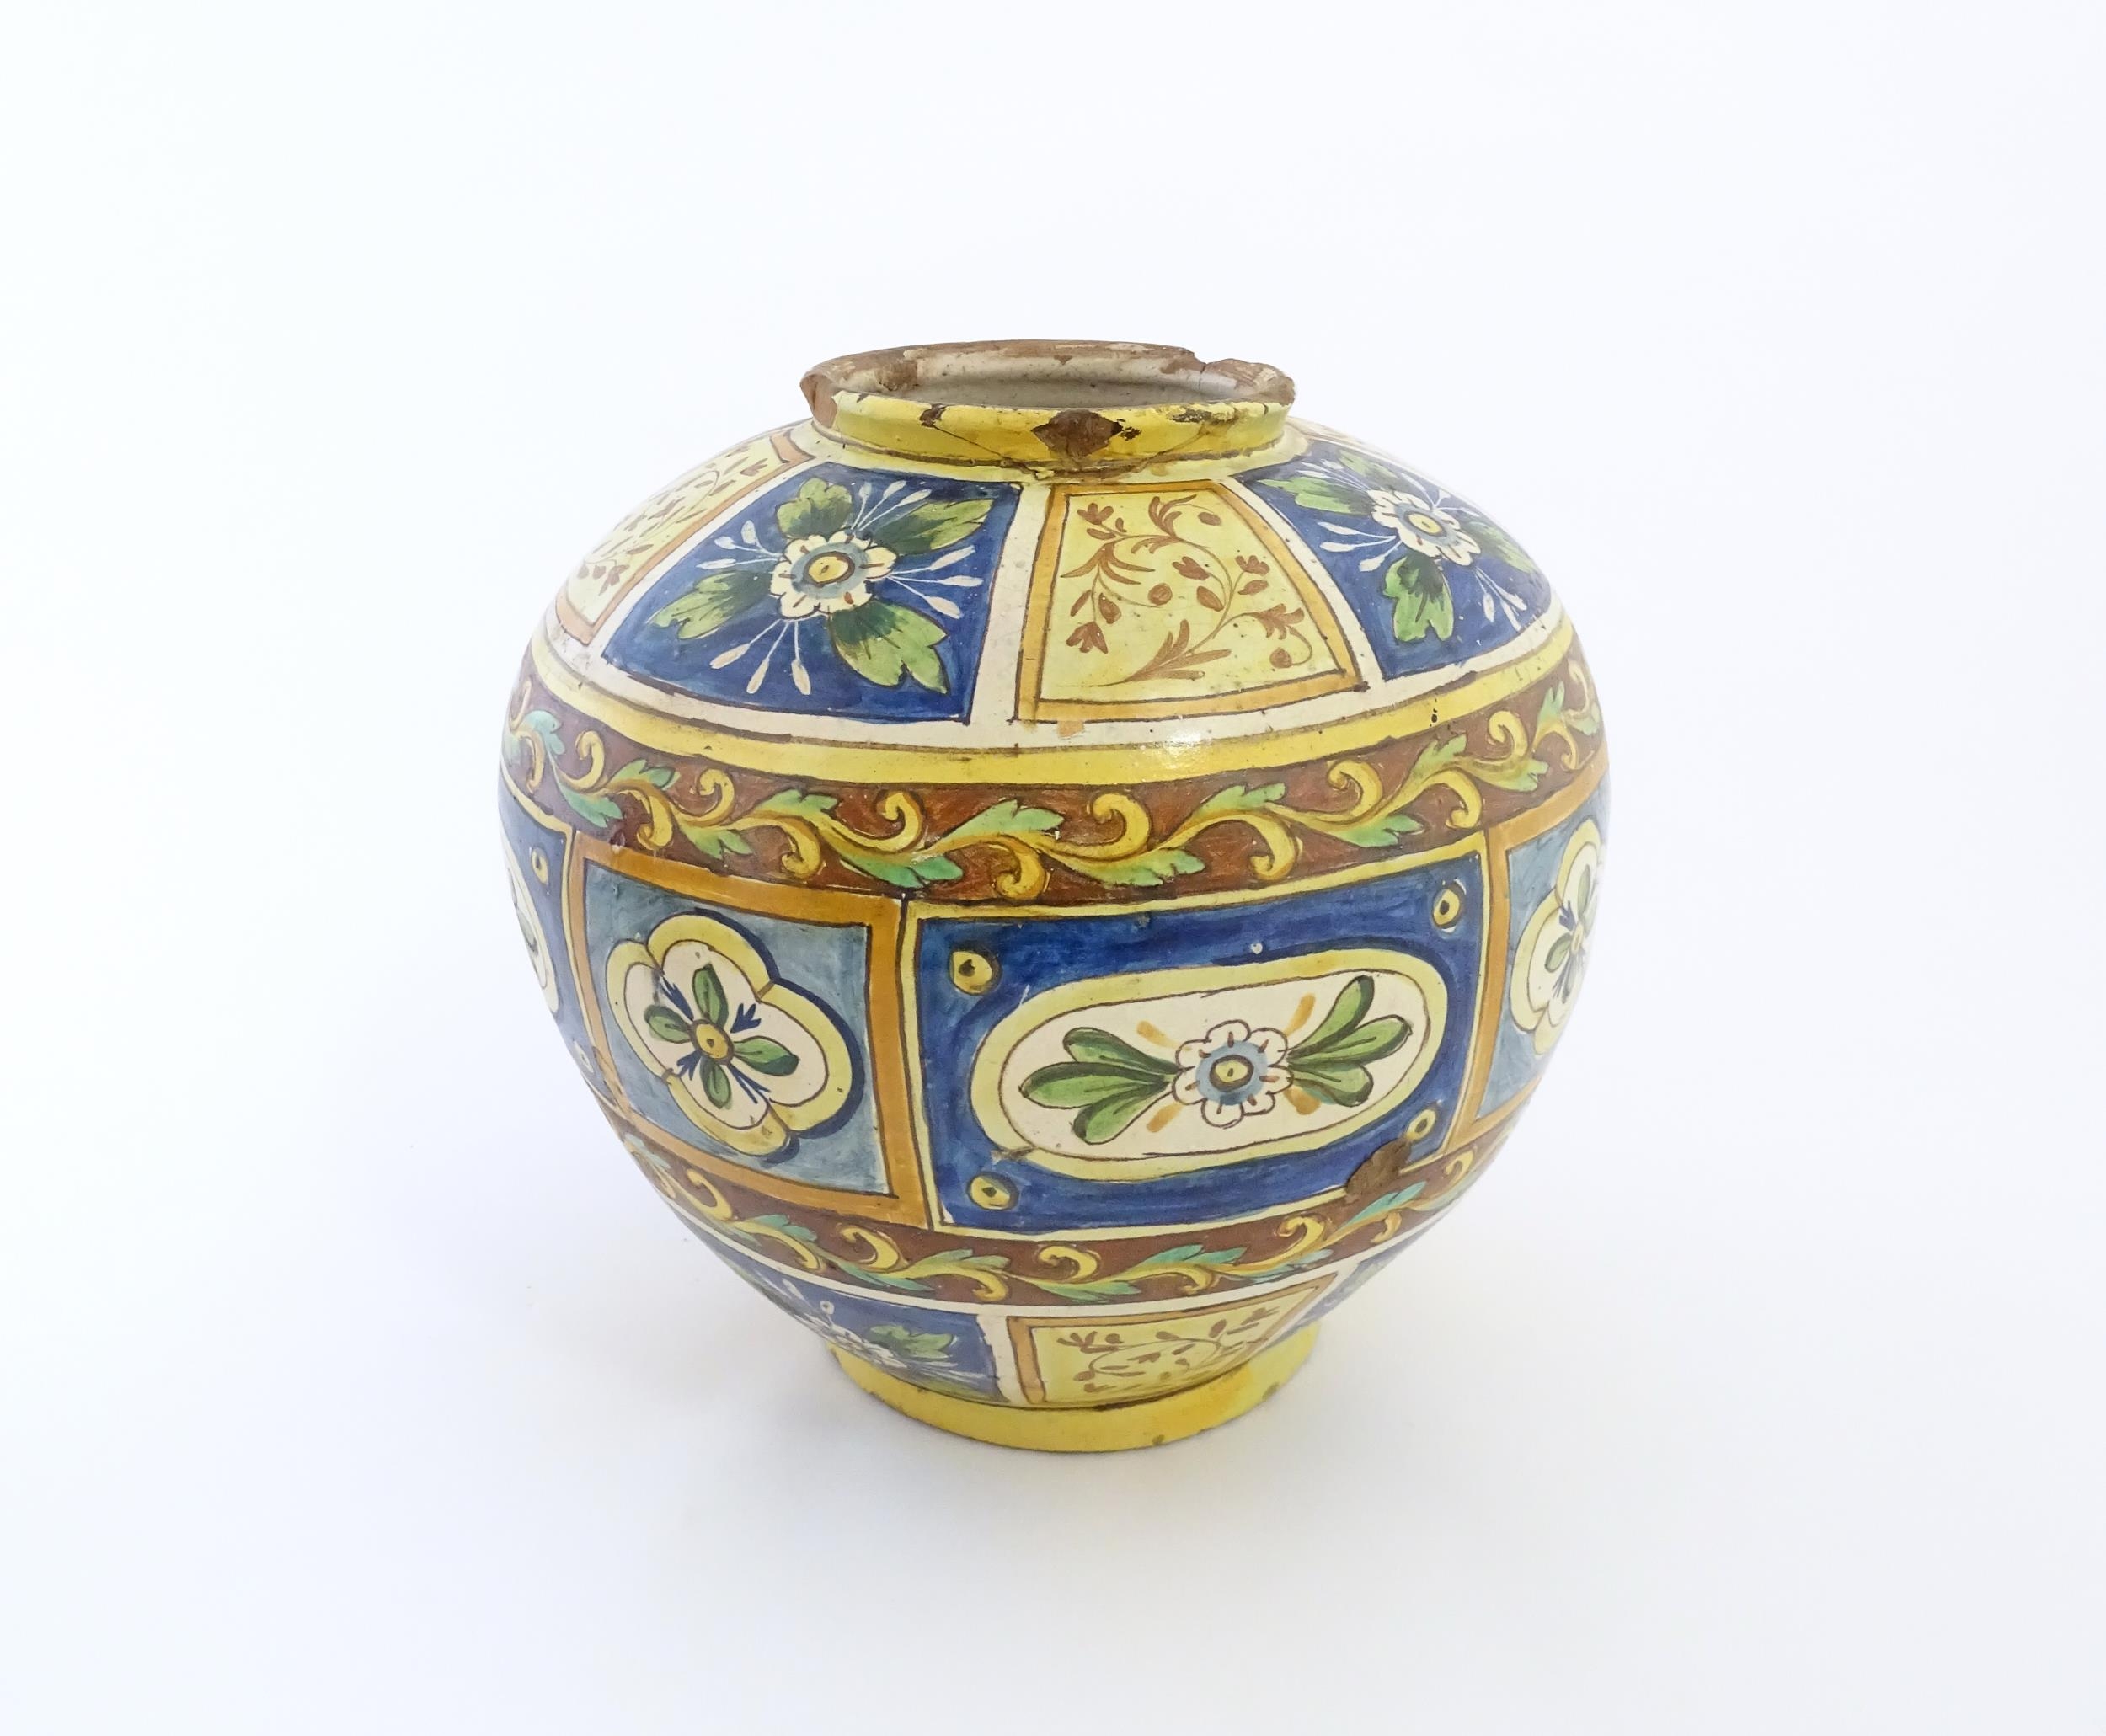 A Sicilian maiolica Bombola vase with panelled and banded decoration depicting flowers and - Image 6 of 10